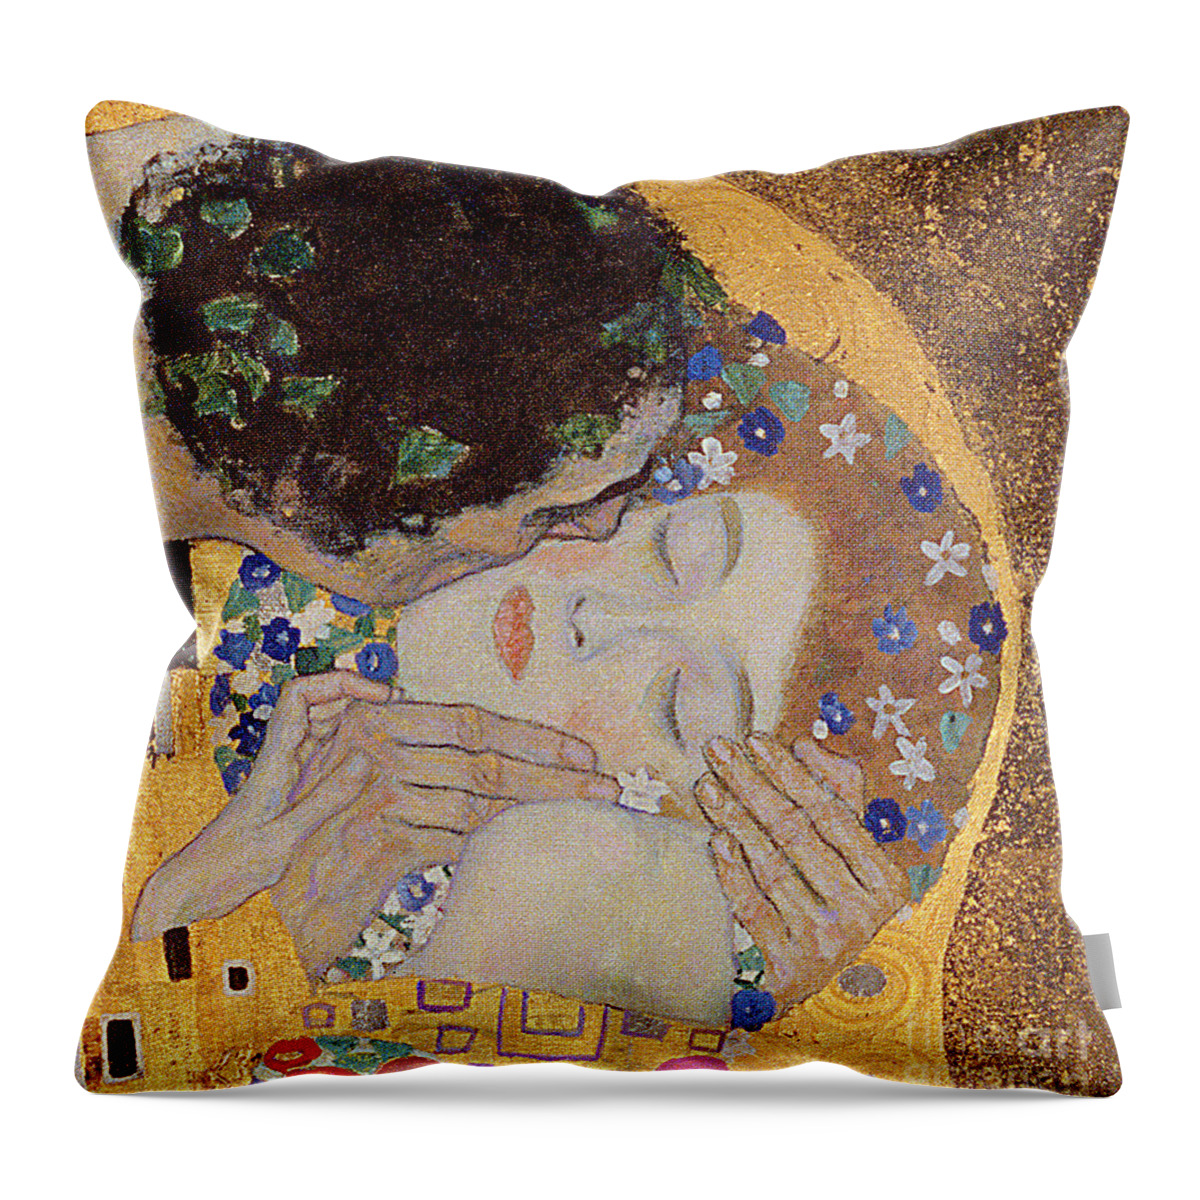 Klimt Throw Pillow featuring the painting The Kiss by Gustav Klimt